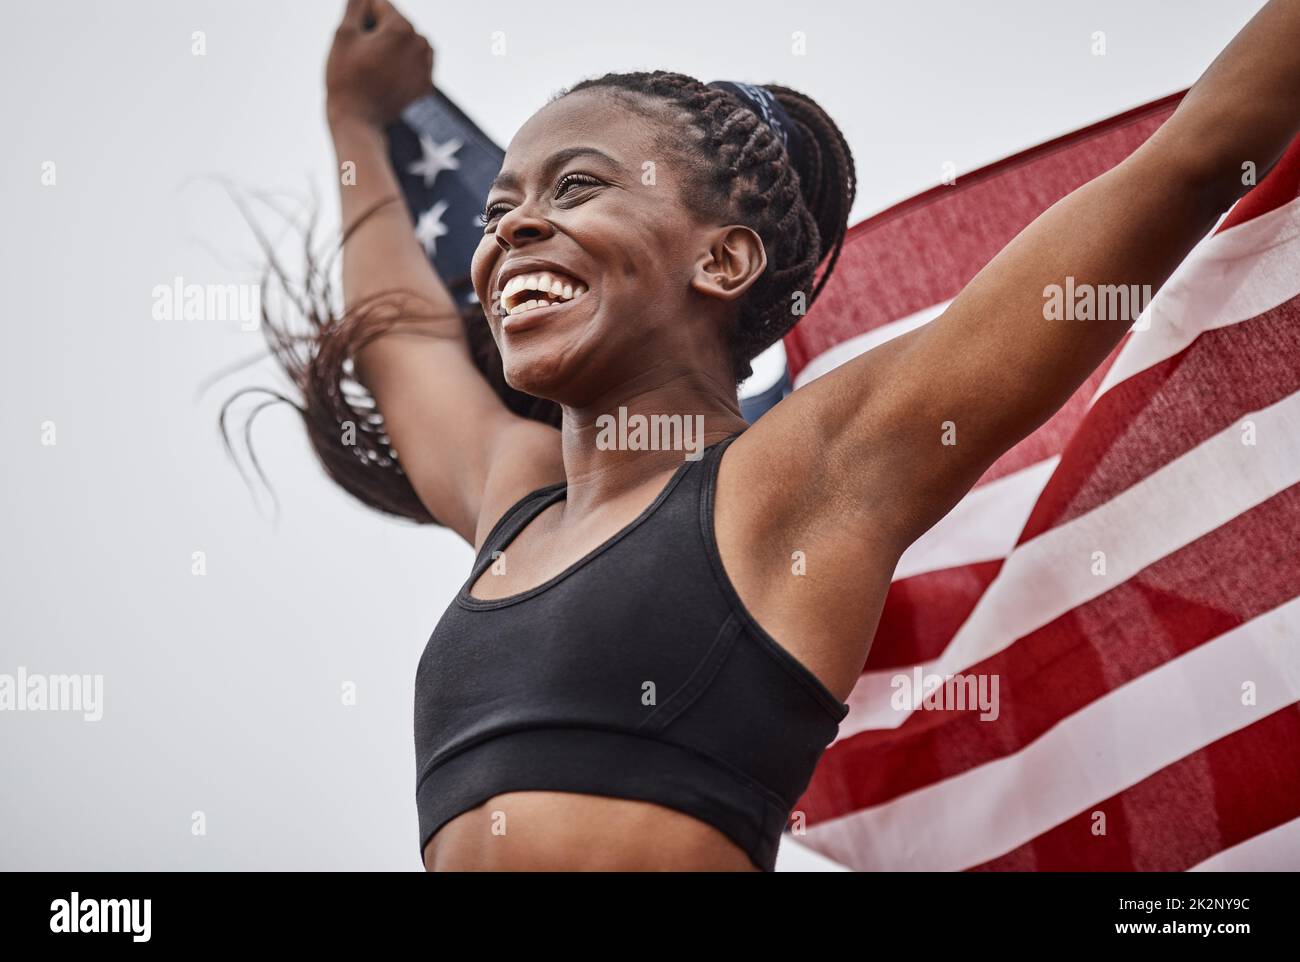 The training was worth it. Shot of a young female athlete holding a flag. Stock Photo